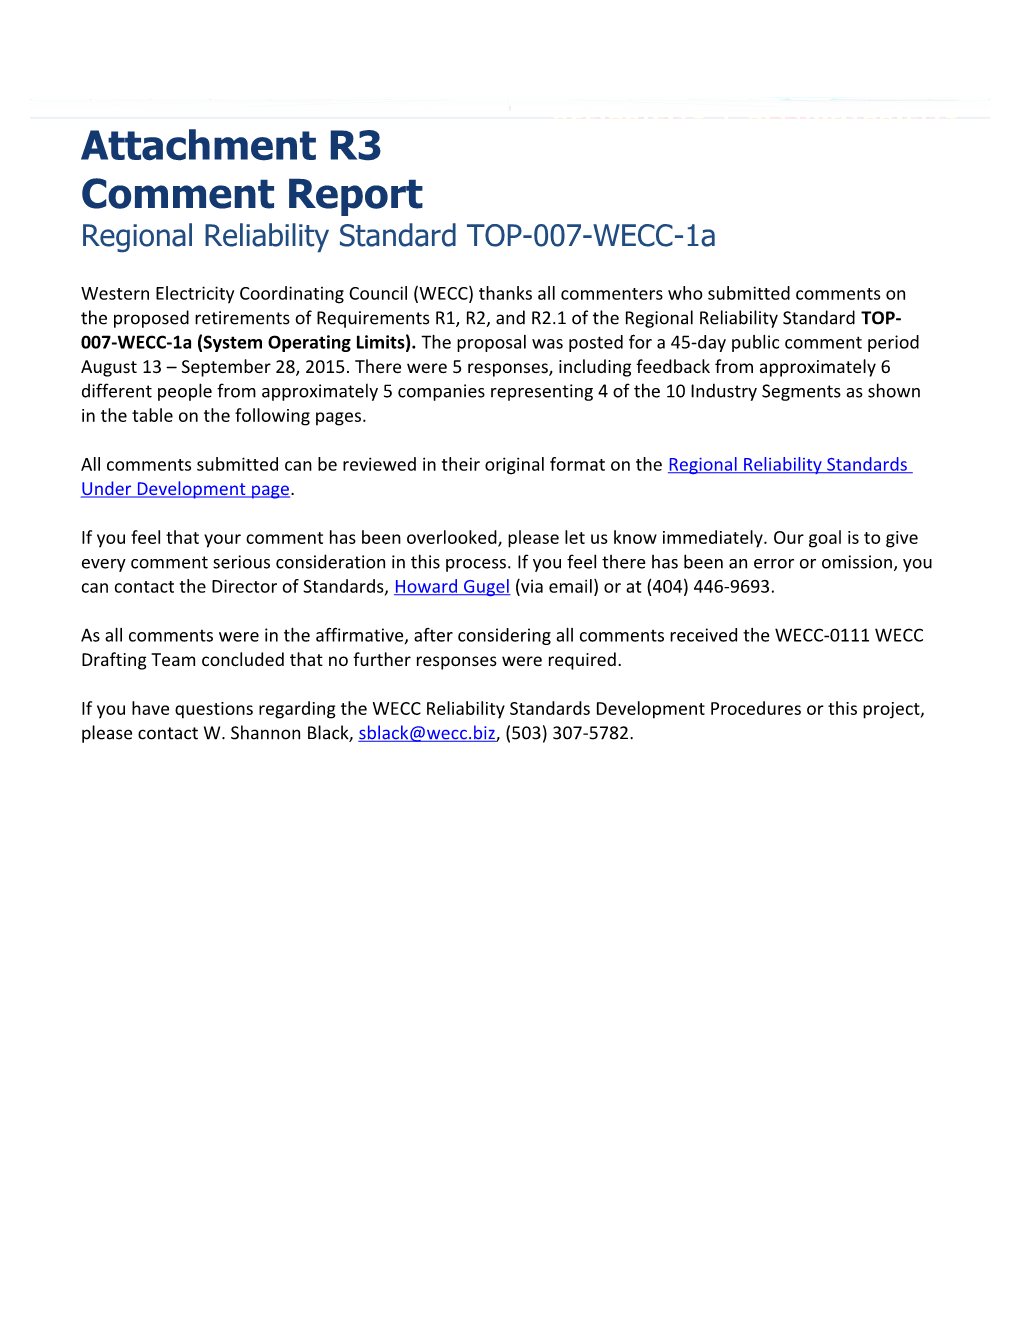 WECC-0111 Posting 1 TOP-WECC-007-WECC-1 Response to Comments - NERC 45 Day 8-4-2015 Through